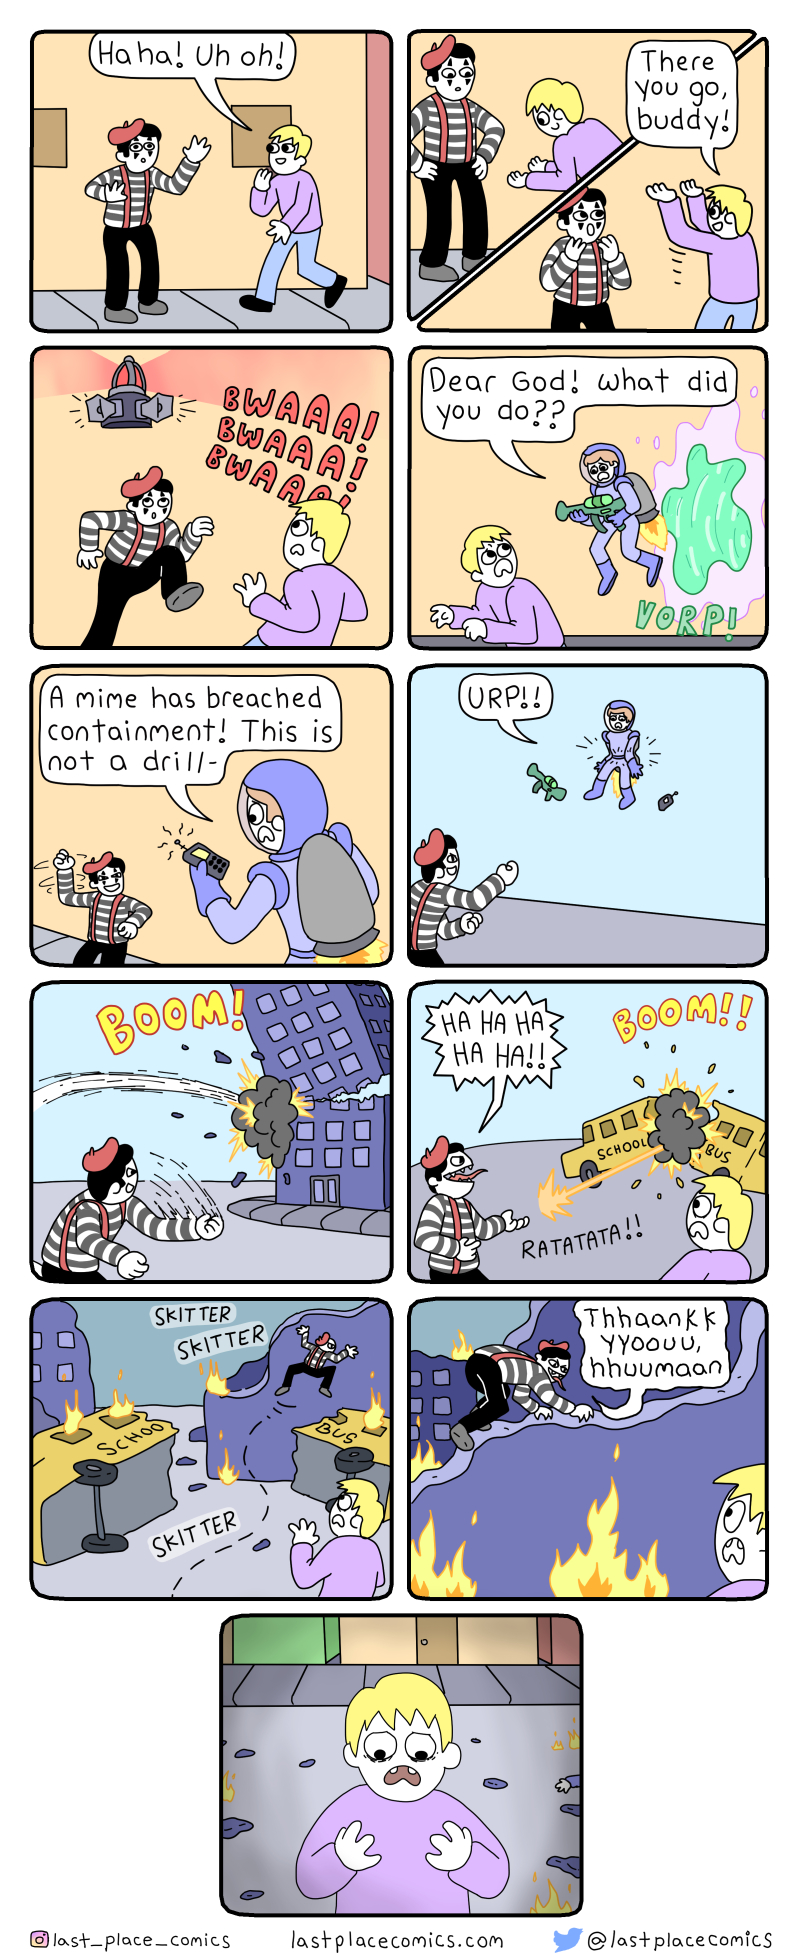 comic, webcomic, last place comics, mime, mime in a box, invisible box, containment, man, jetpack, freed, destruction, lasso, school bus, explosions, thank you human